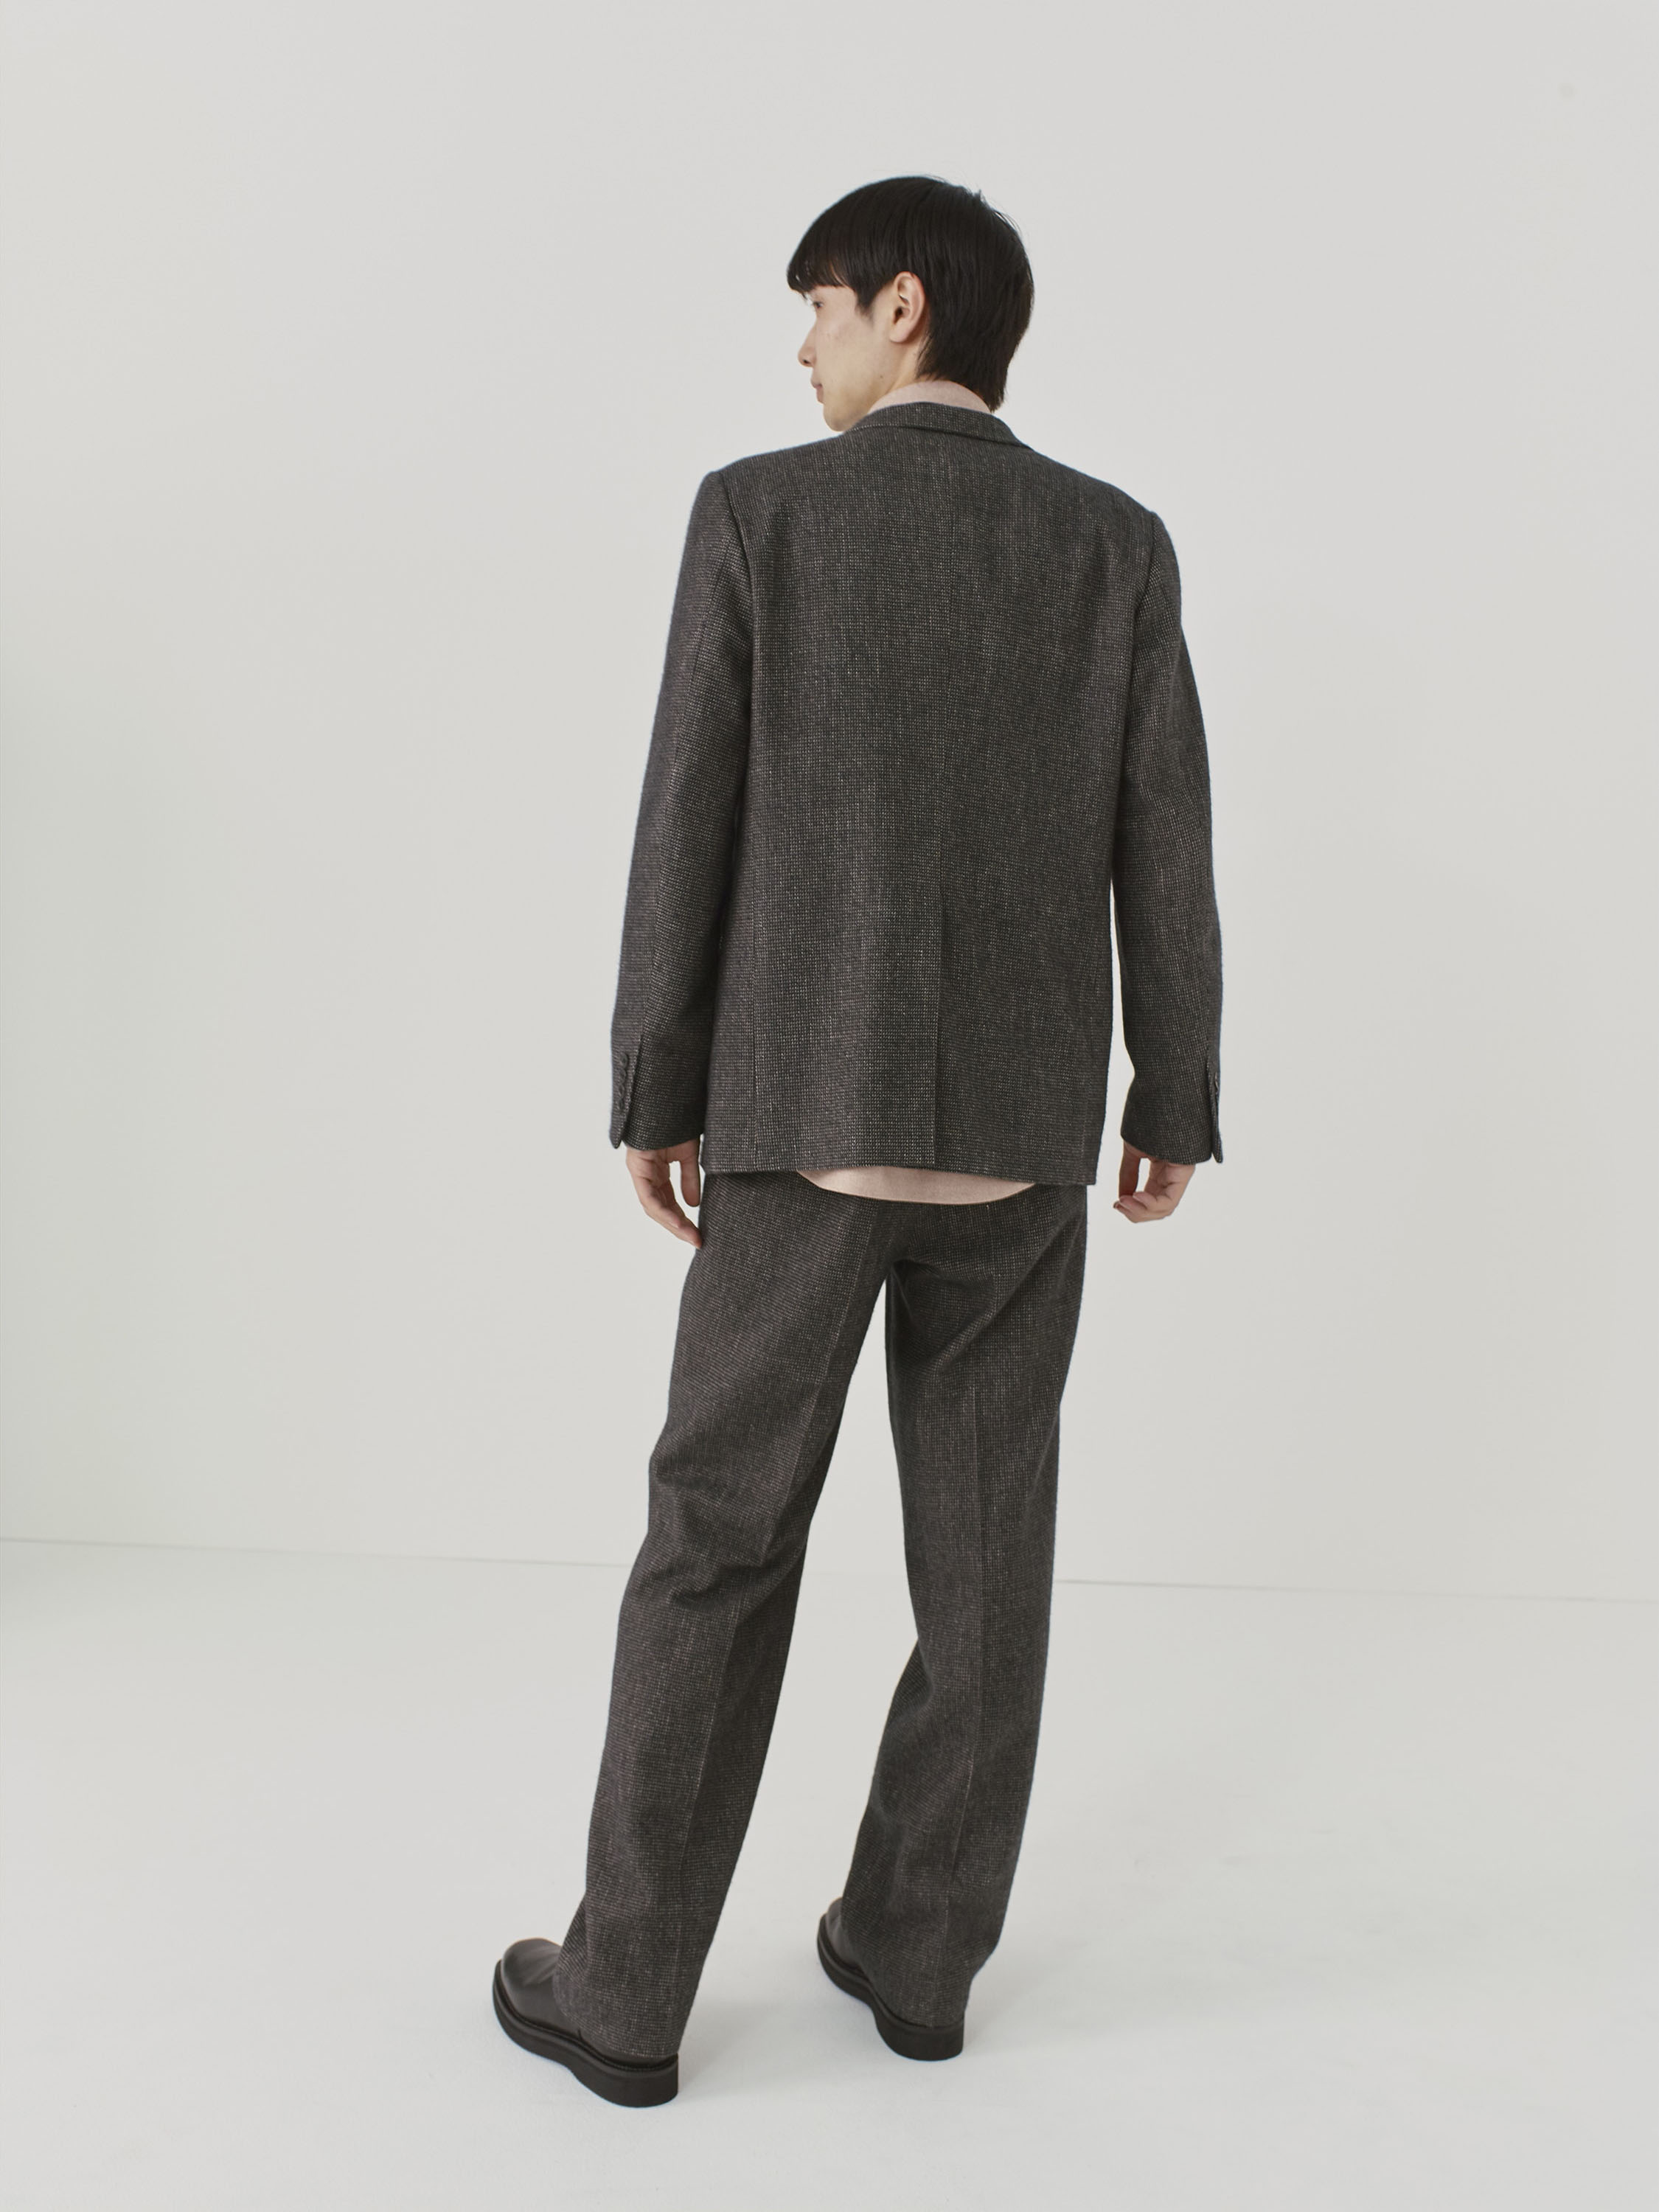 ORGANIC COTTON CASHMERE WOOL TWEED JACKET 詳細画像 TOP CHARCOAL 1